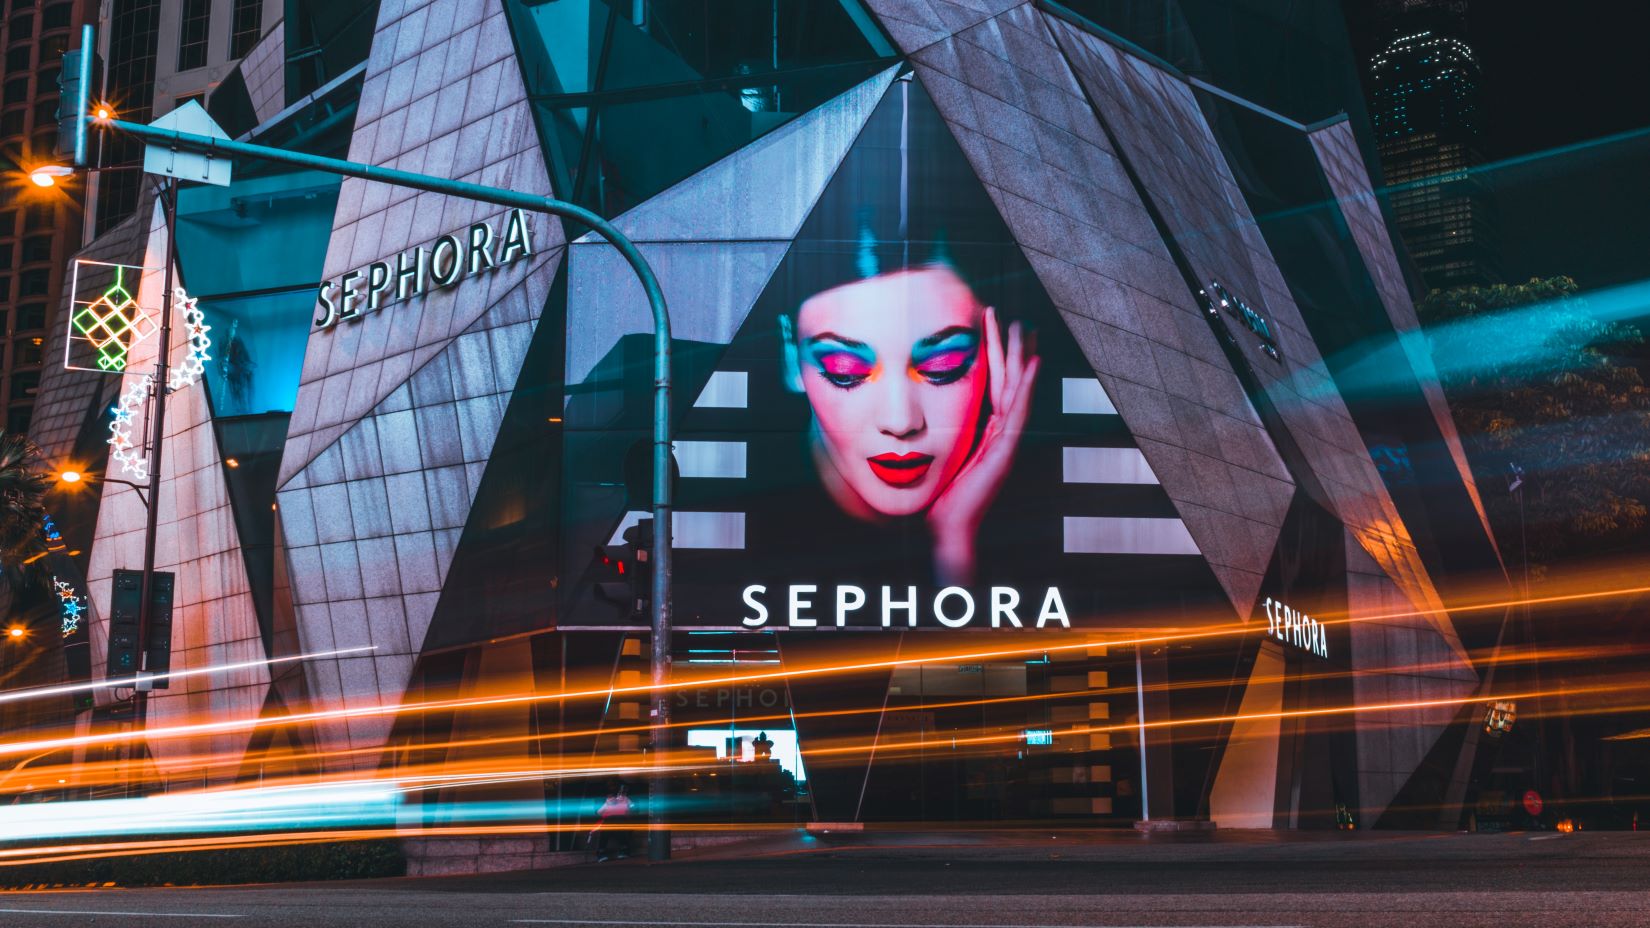 An image of a Sephora store.